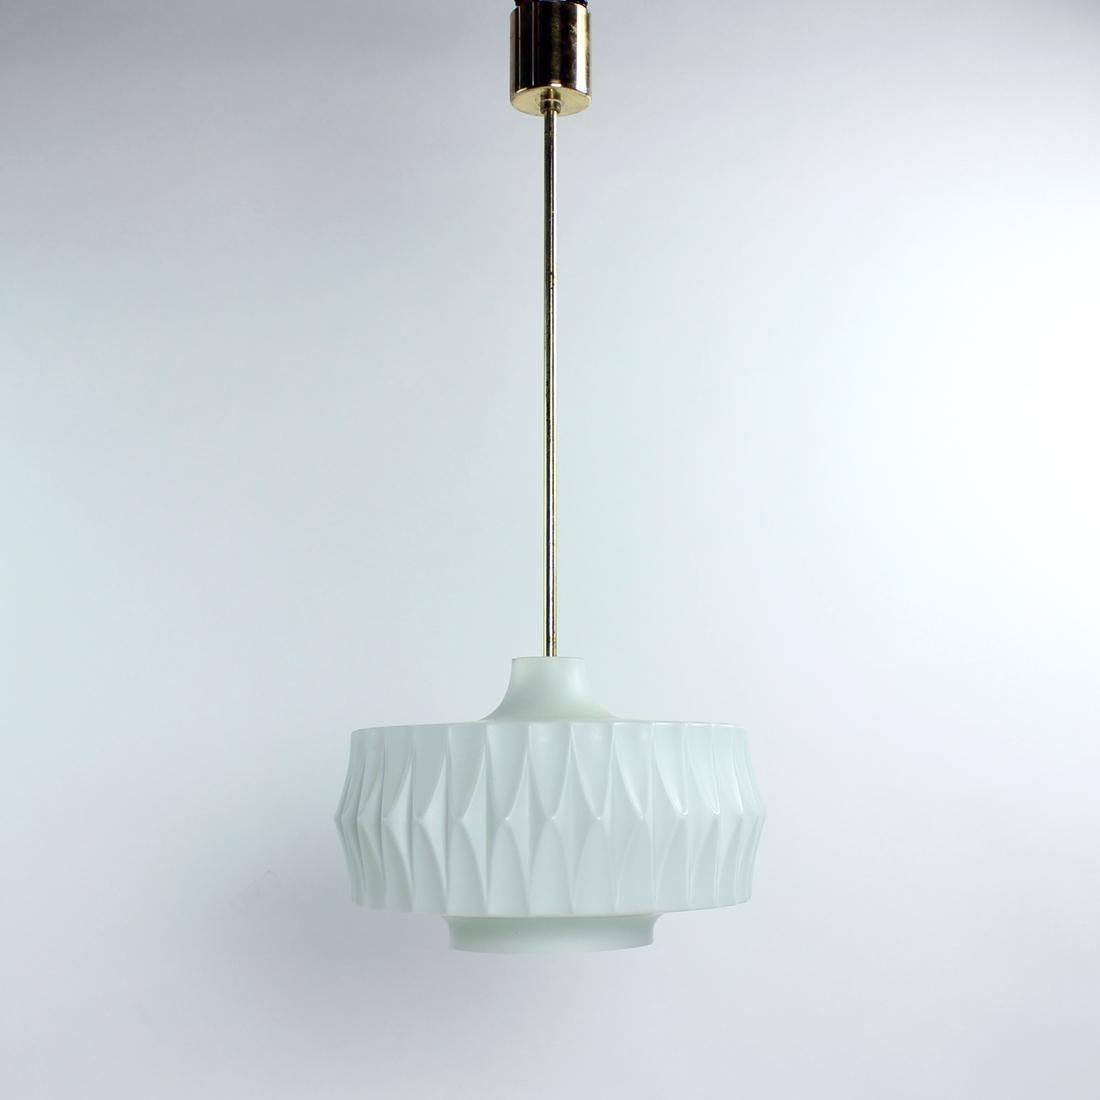 Beautiful midcentury design ceiling light in a striking combination. The pendant was produced in Czechoslovakia in 1960s and was used until recently in a big auditorium. The elegant design shiel is made of white opaline glass in matt finish with